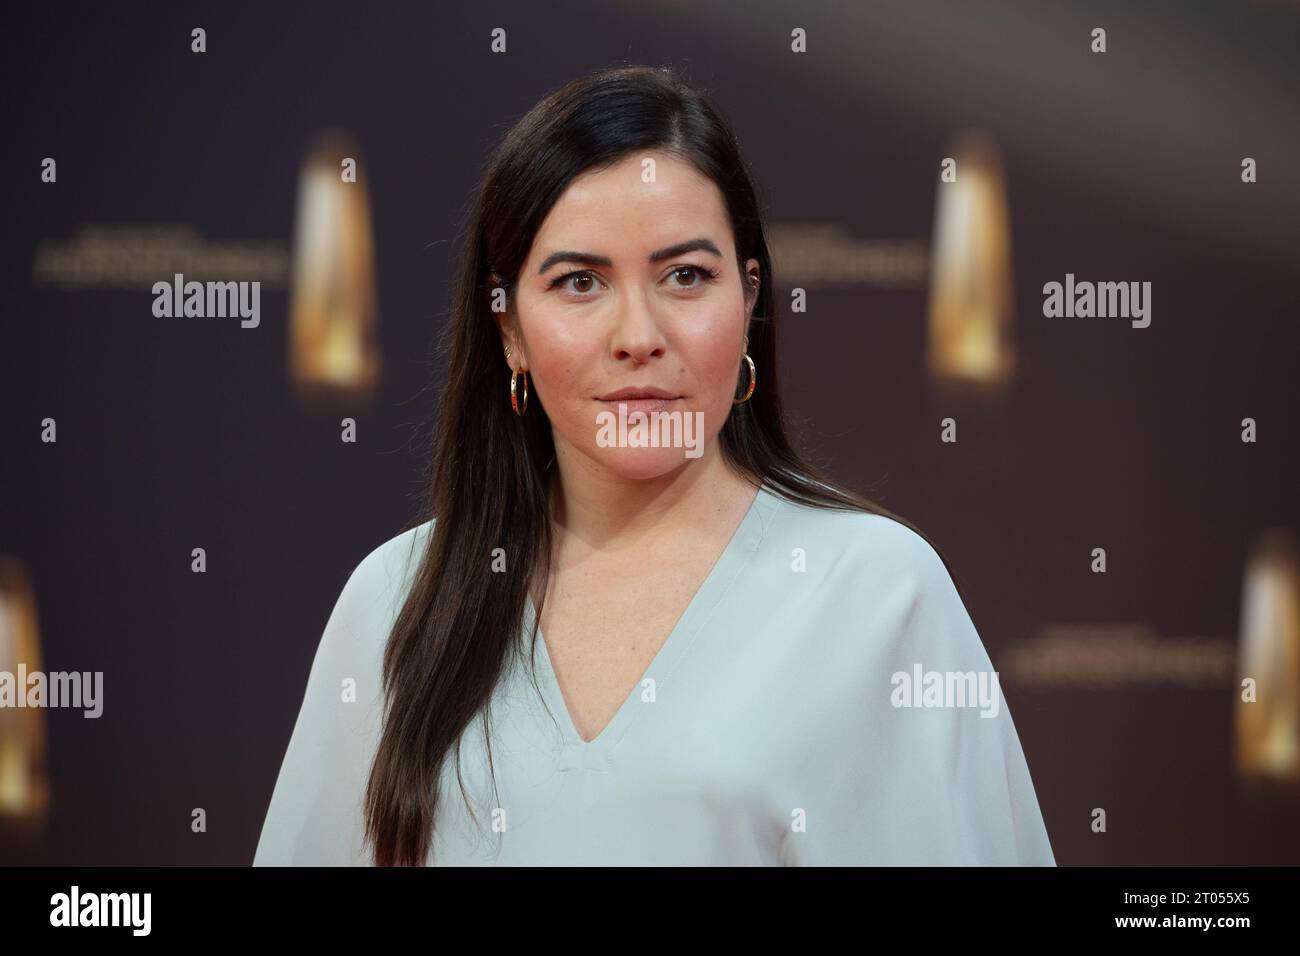 Aline ABBOUD, Moderatorin, Roter Teppich, Red Carpet Show, Ankunft, arrival, Verleihung des Deutschen Fernsehpreises, Der Deutsche Fernsehpreis 2023, Deutscher Fernsehpreis 2023 in den MMC Studios Koeln, am 28.09.2023. *** Aline ABBOUD, presenter, red carpet, red carpet show, arrival, arrival, German Television Award, The German Television Award 2023, German Television Award 2023 at MMC Studios Cologne, on 28 09 2023 Stock Photo